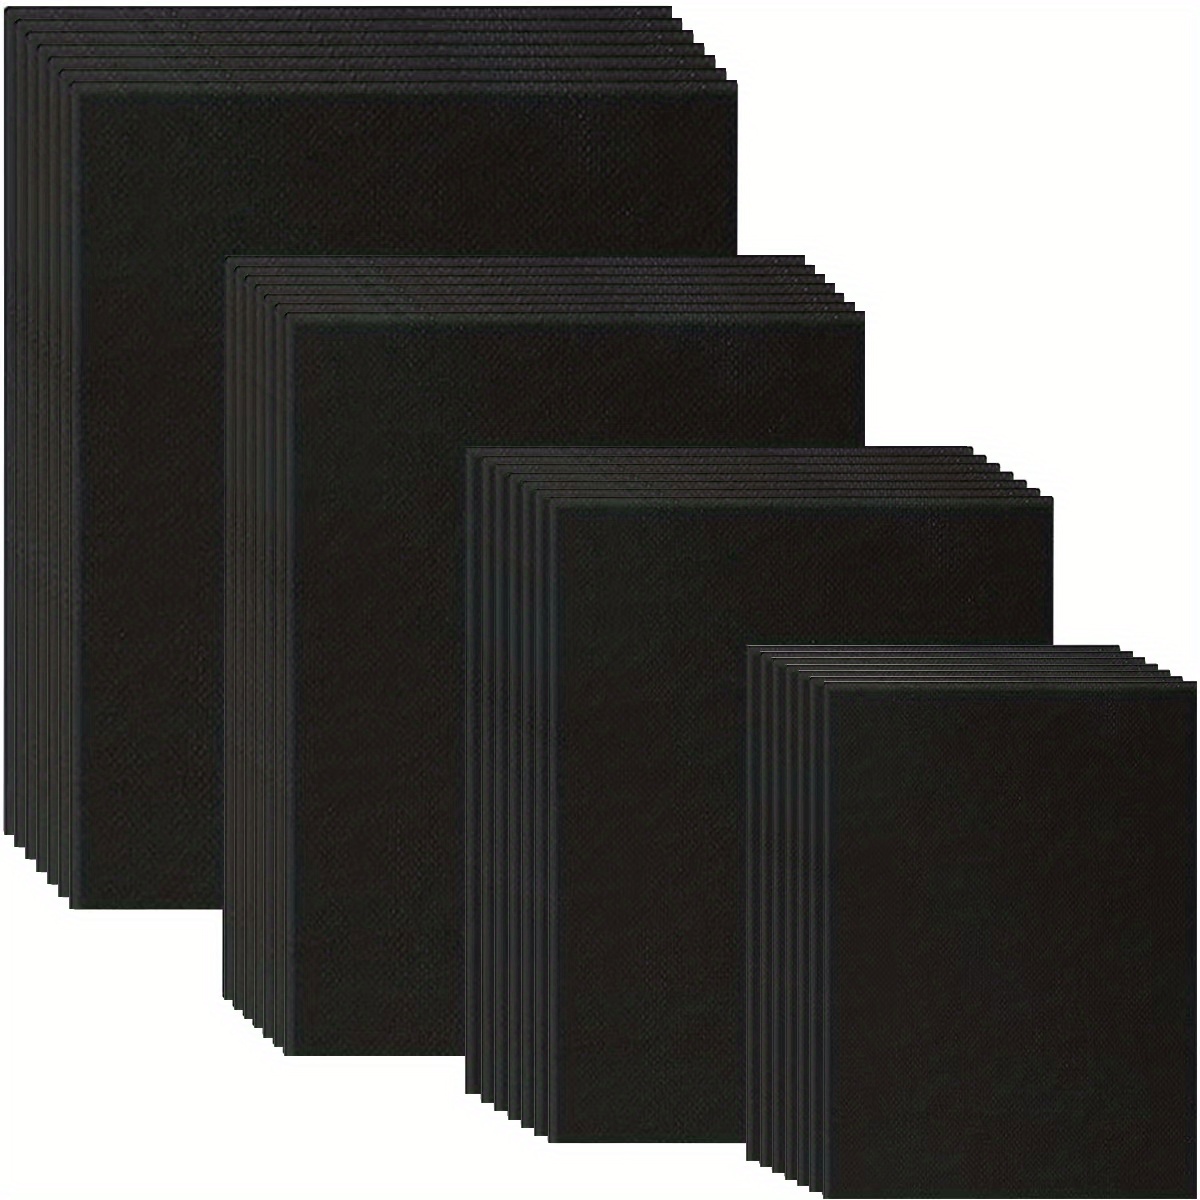 4 Pieces Black Paint Canvases for Painting, 30x30cm-12x12in Blank Black  Canvas, 100% Cotton Stretched Canvas, 8 oz Gesso-Primed